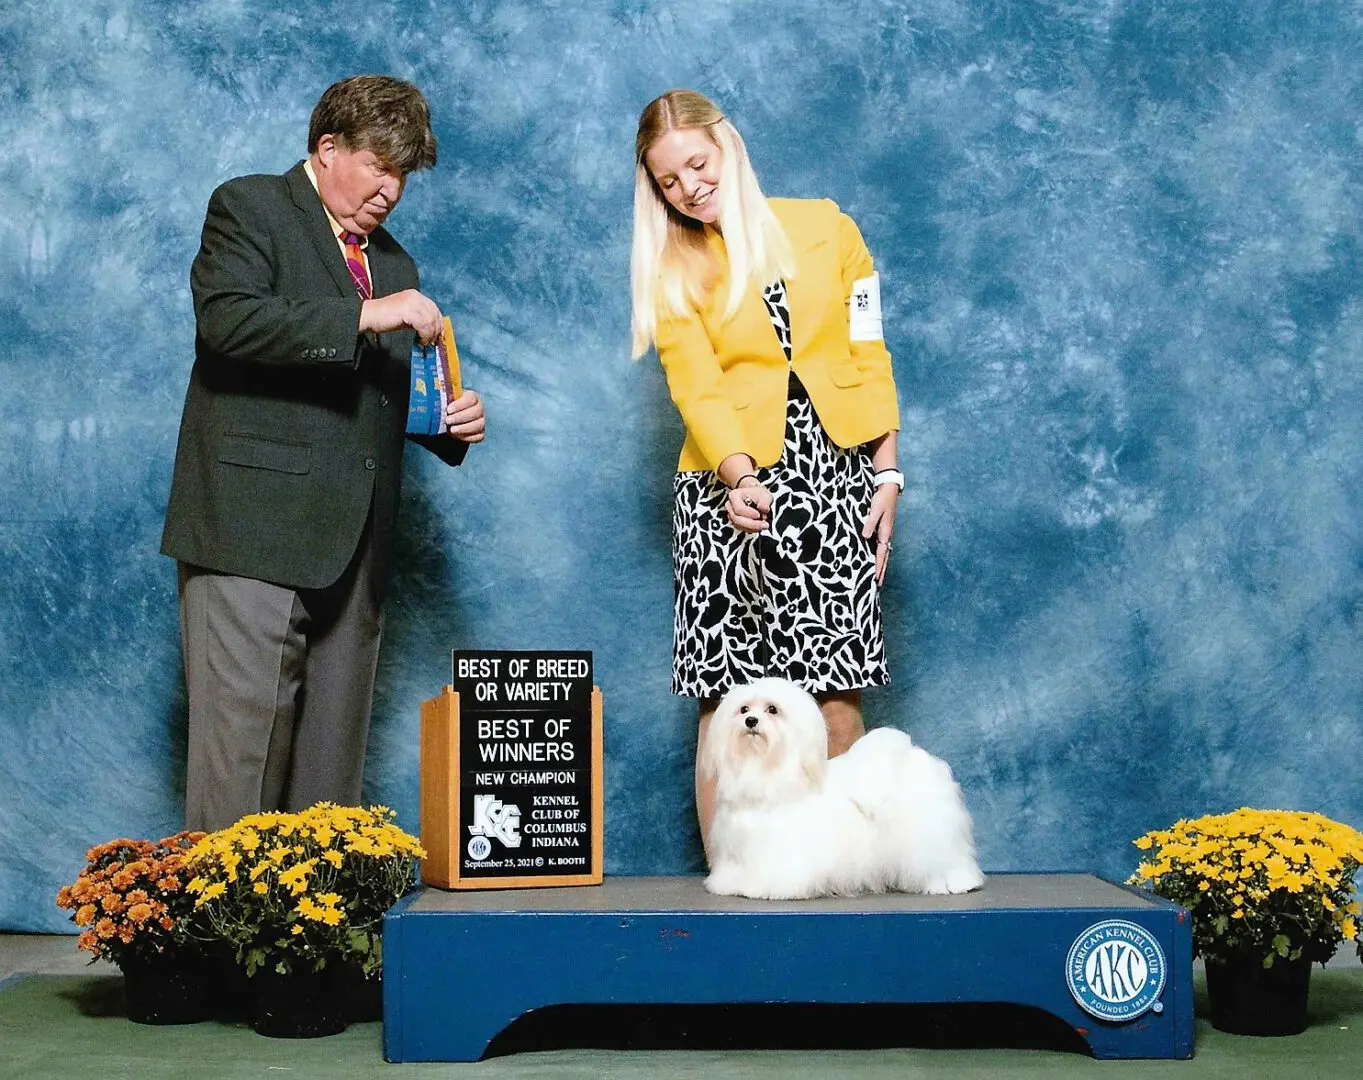 A man and woman standing next to a Havanese puppy.